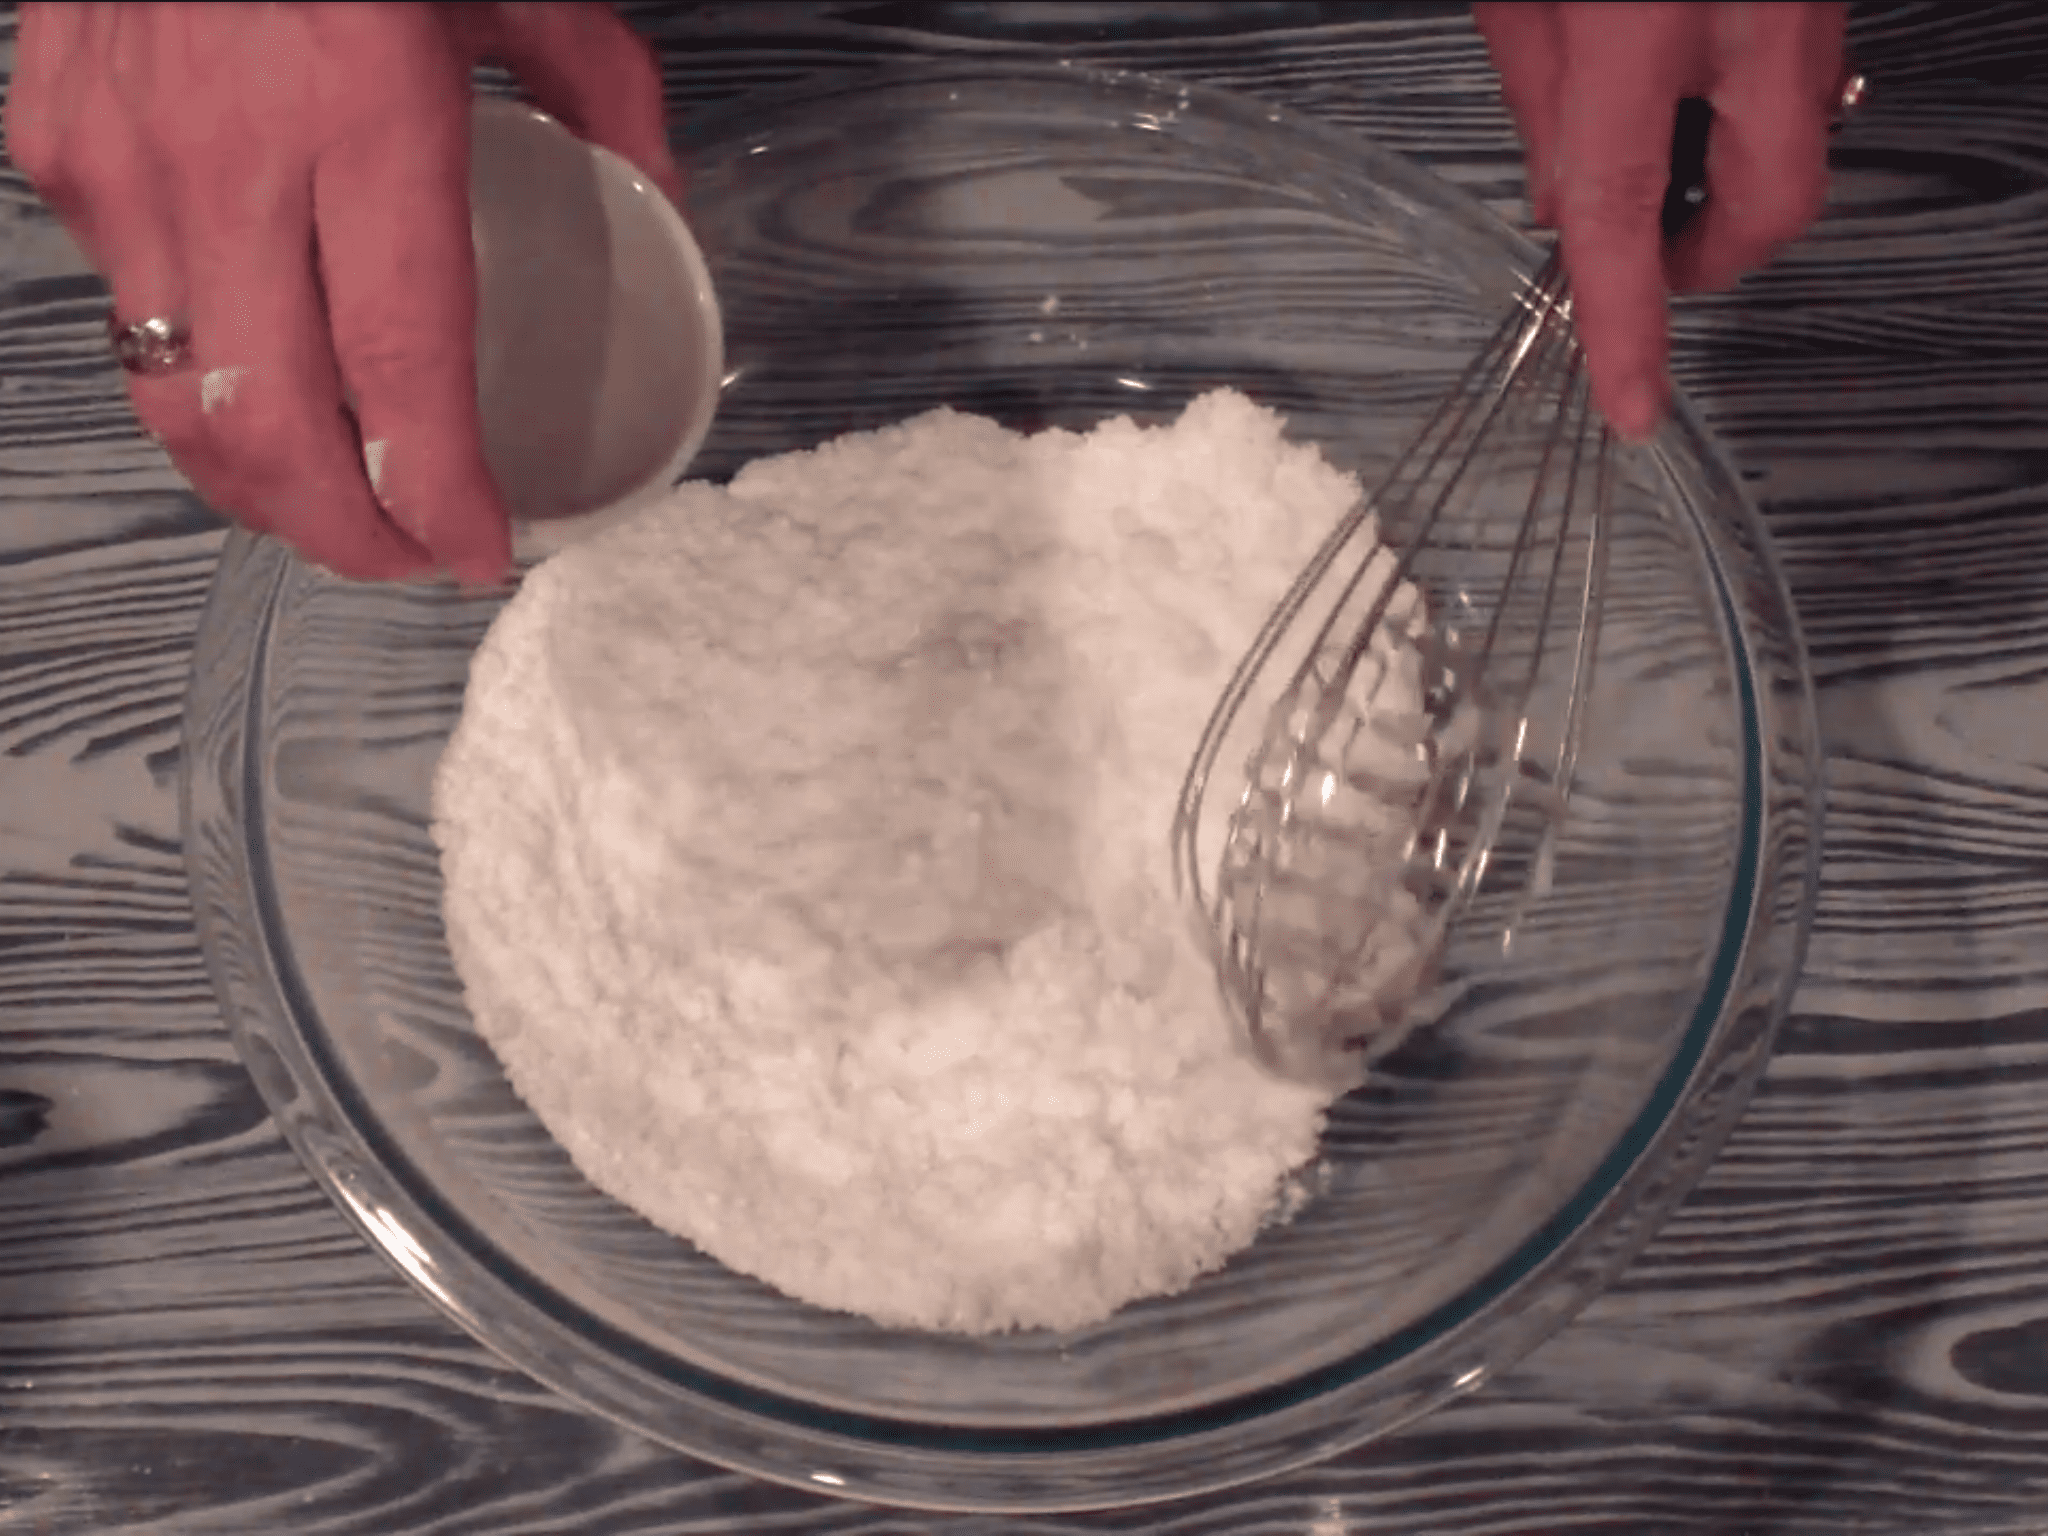 Whisking all the ingredients together until the mixture is evenly mixed together.